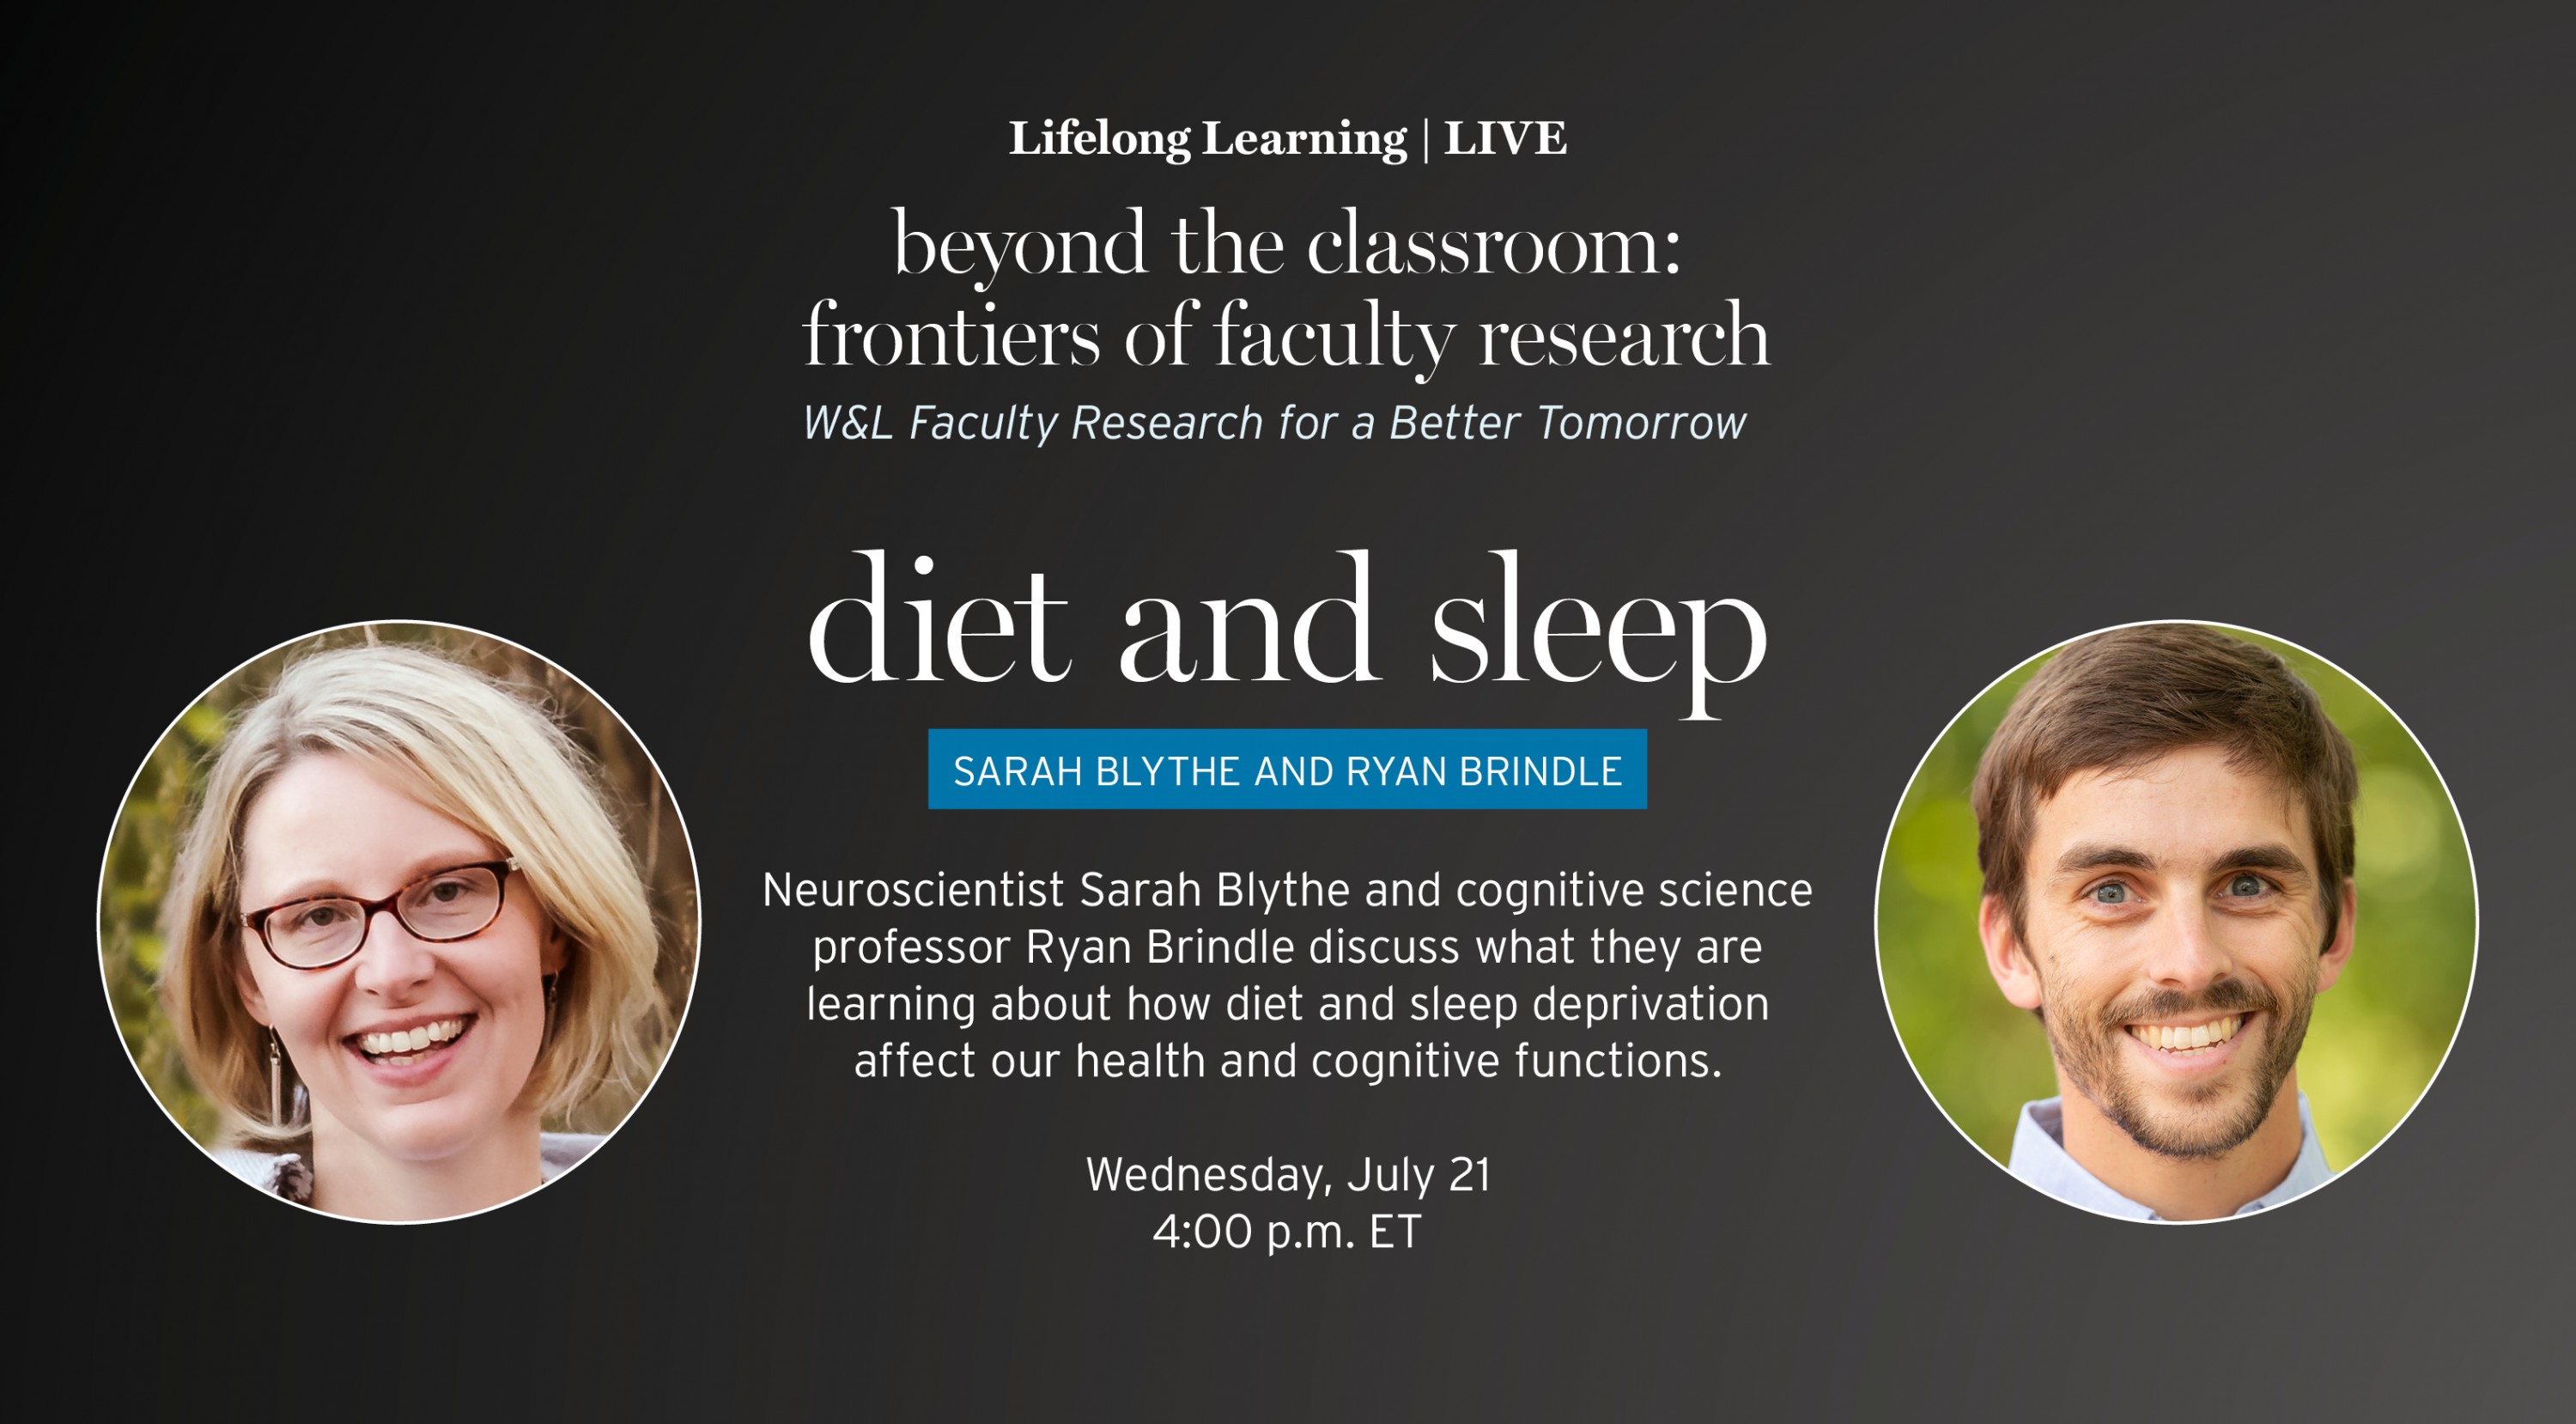 An image of the Diet and Sleep presentation, part of the Beyond the Classroom: Frontiers of Faculty Research series